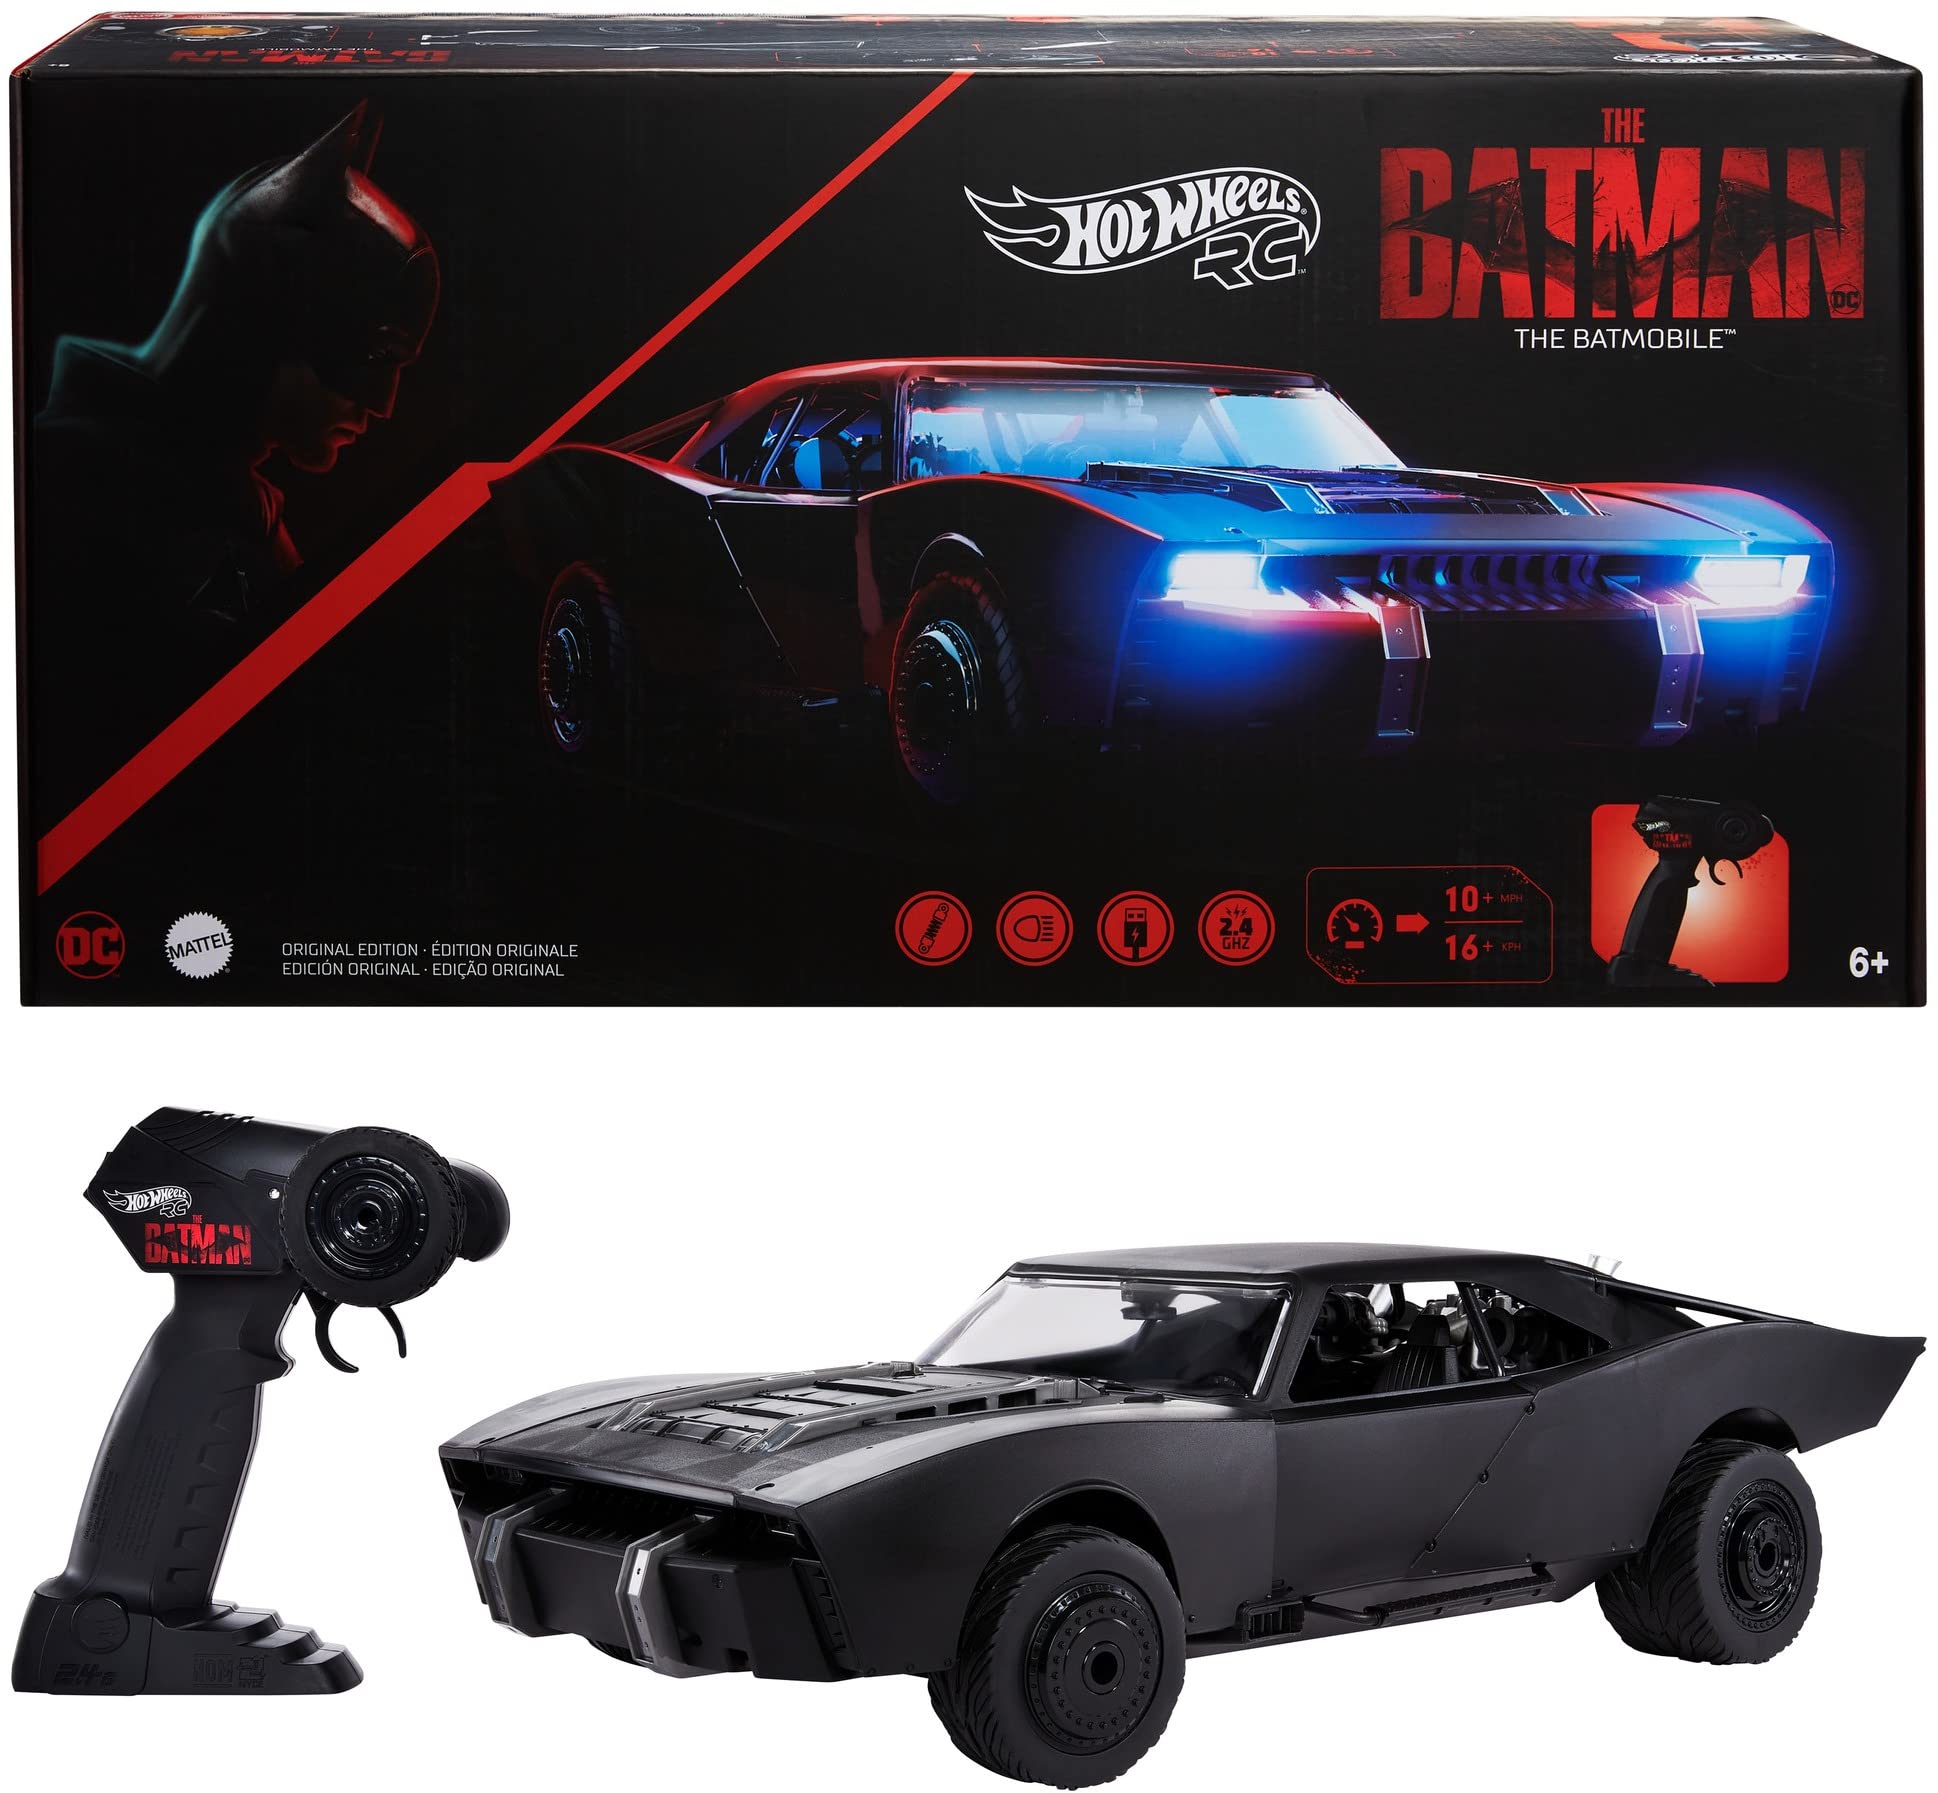 Mua Hot Wheels RC The Batman Batmobile, Remote-Controlled 1:10 Scale Toy  Vehicle from The Movie, USB Rechargeable Controller, Gift for Fans of Cars  & Comics & Kids 5 Years Old & Up [